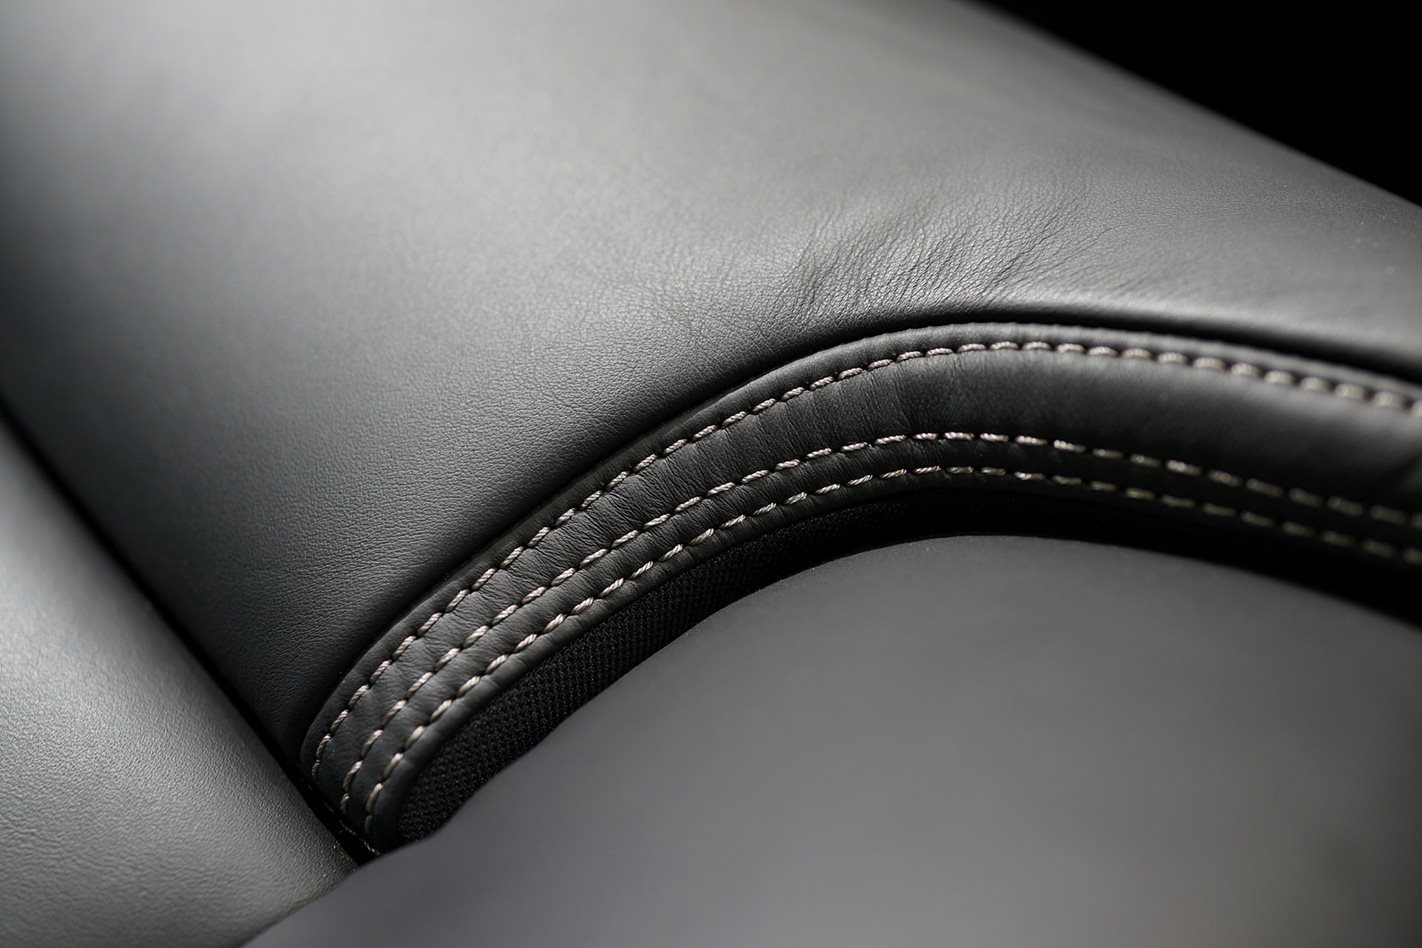 Leatherette, leather, leather-appointed: What’s the difference?